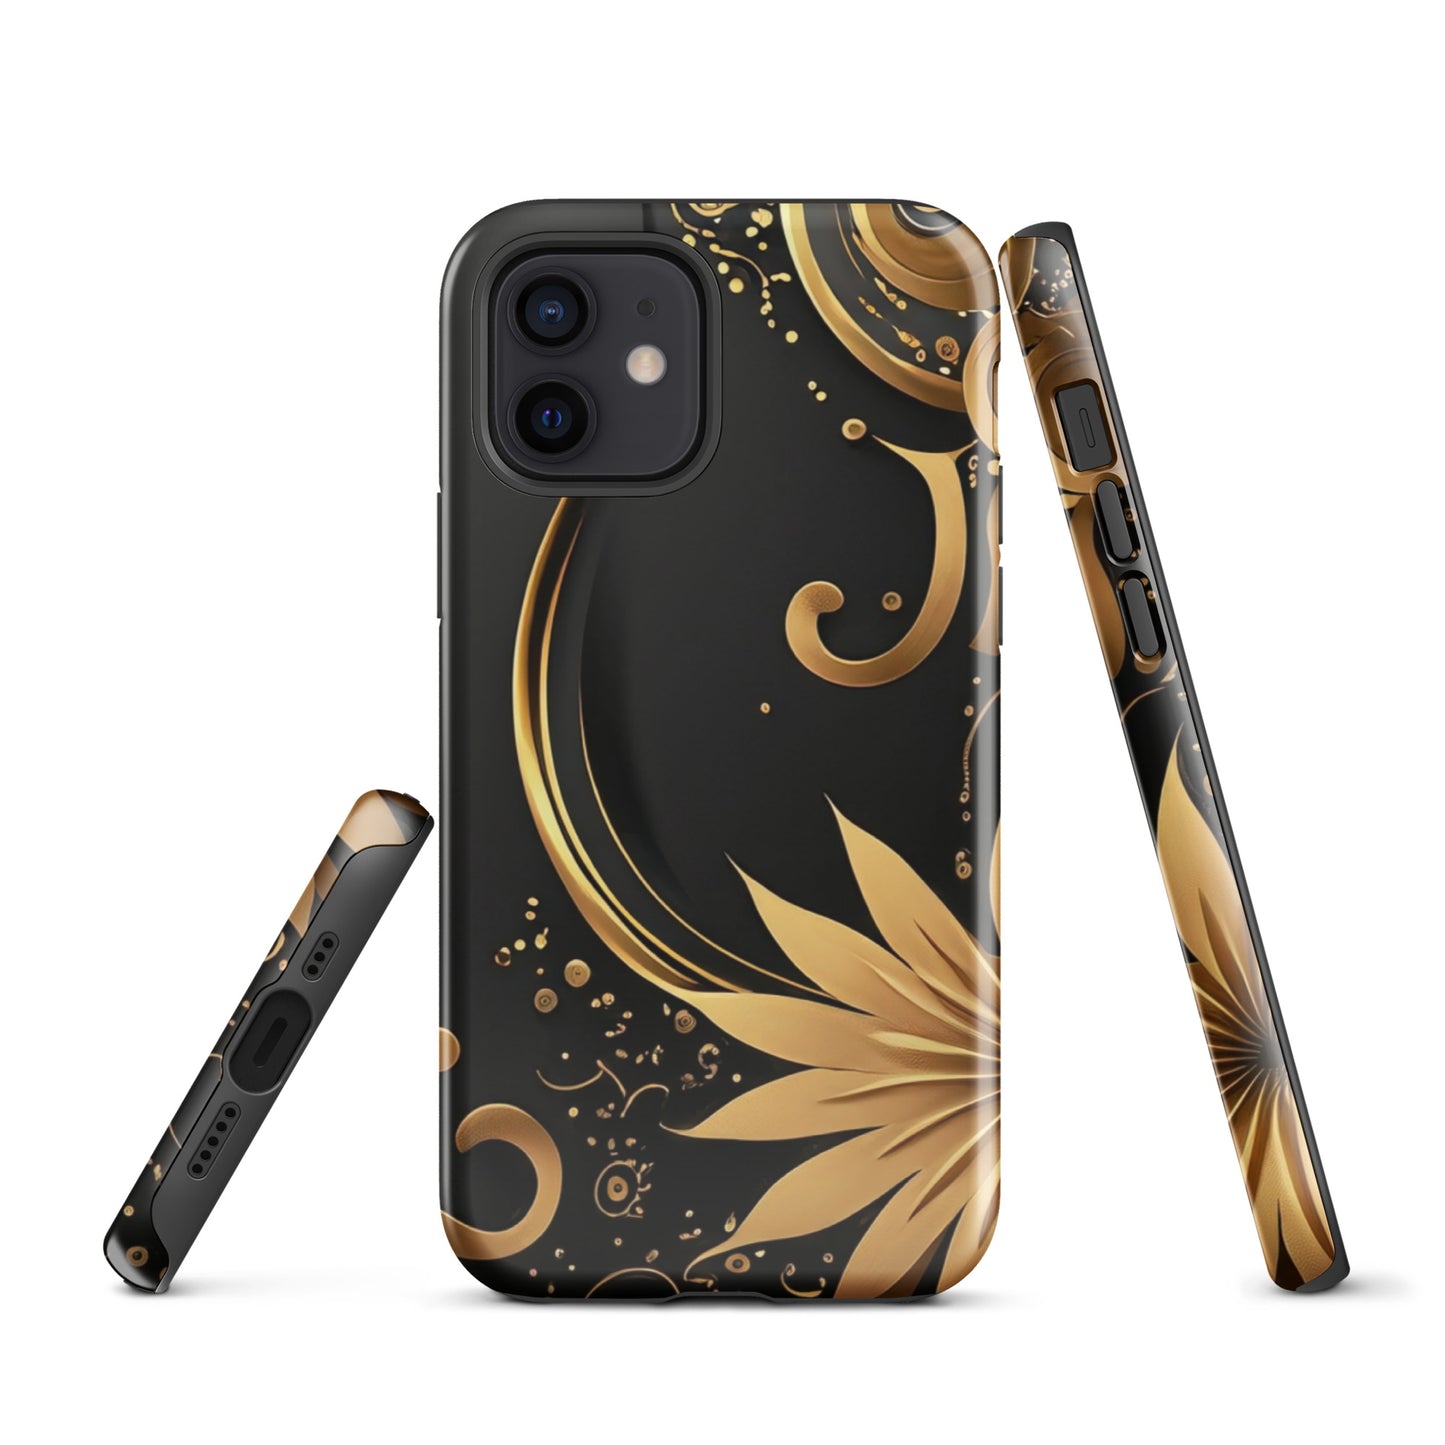 A Golden Flower Case for the iPhone 12 